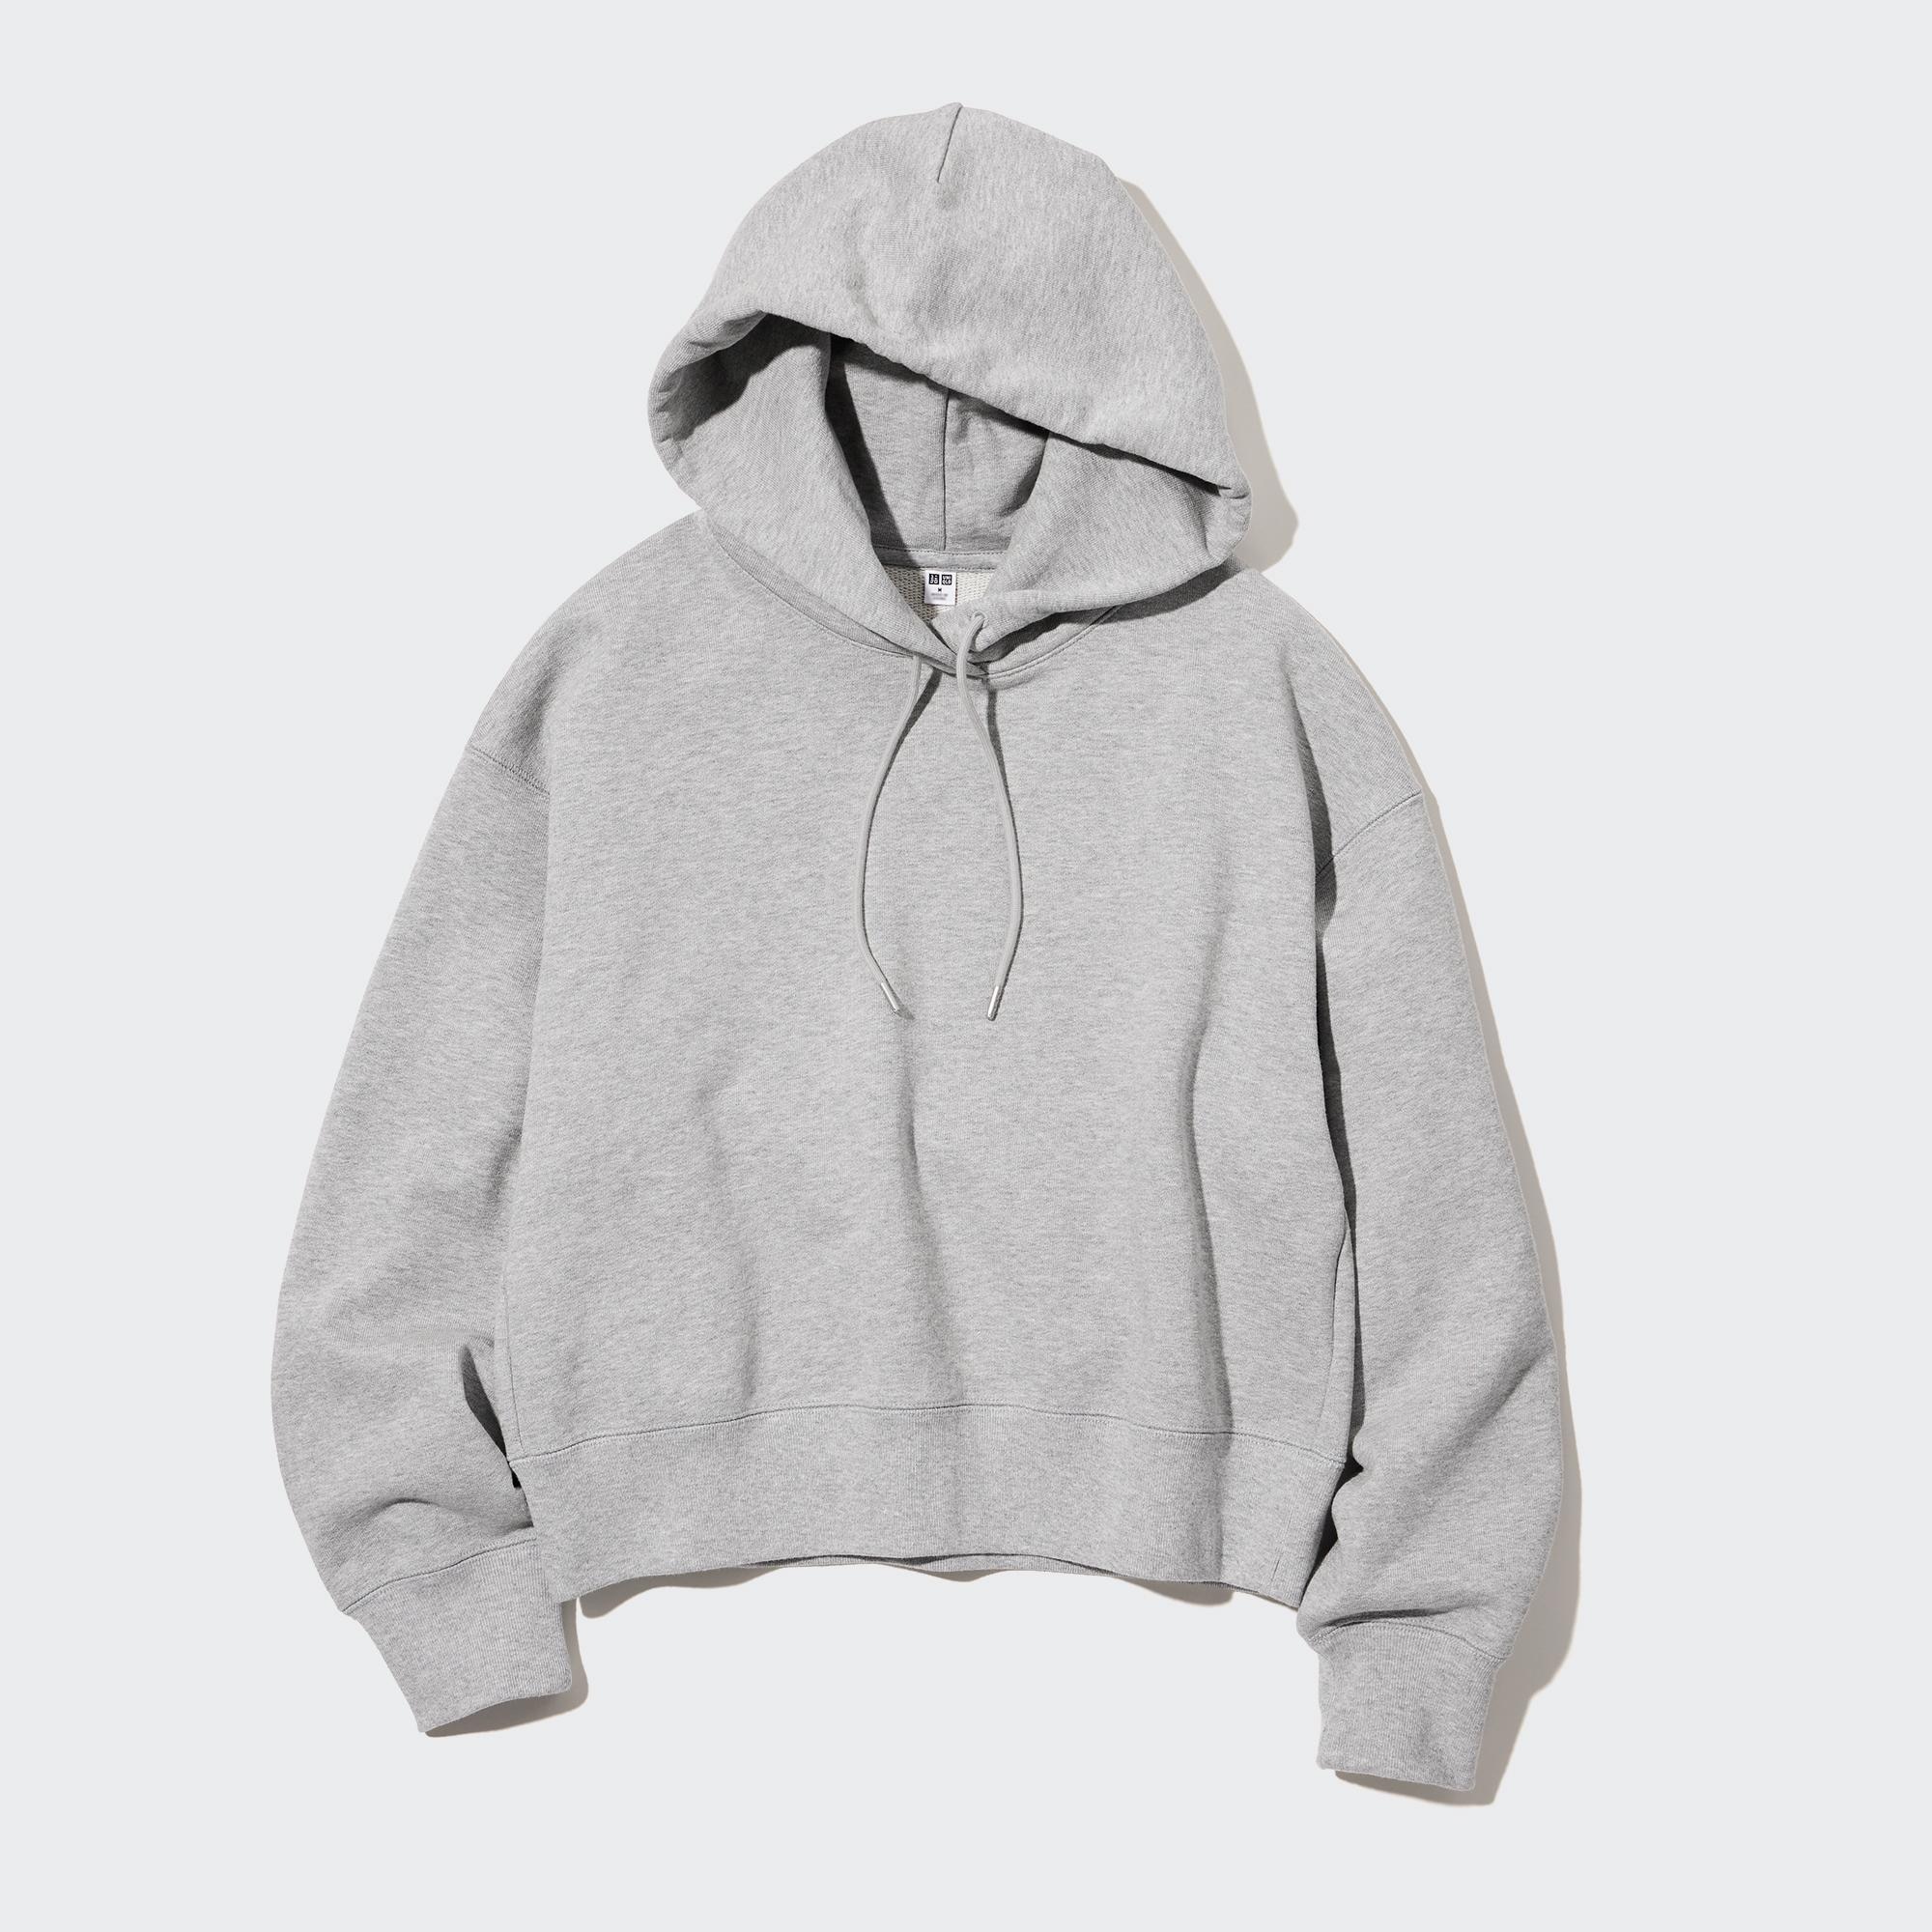 Uniqlo Hoodie Oversized Jacket Mens Fashion Tops  Sets Hoodies on  Carousell